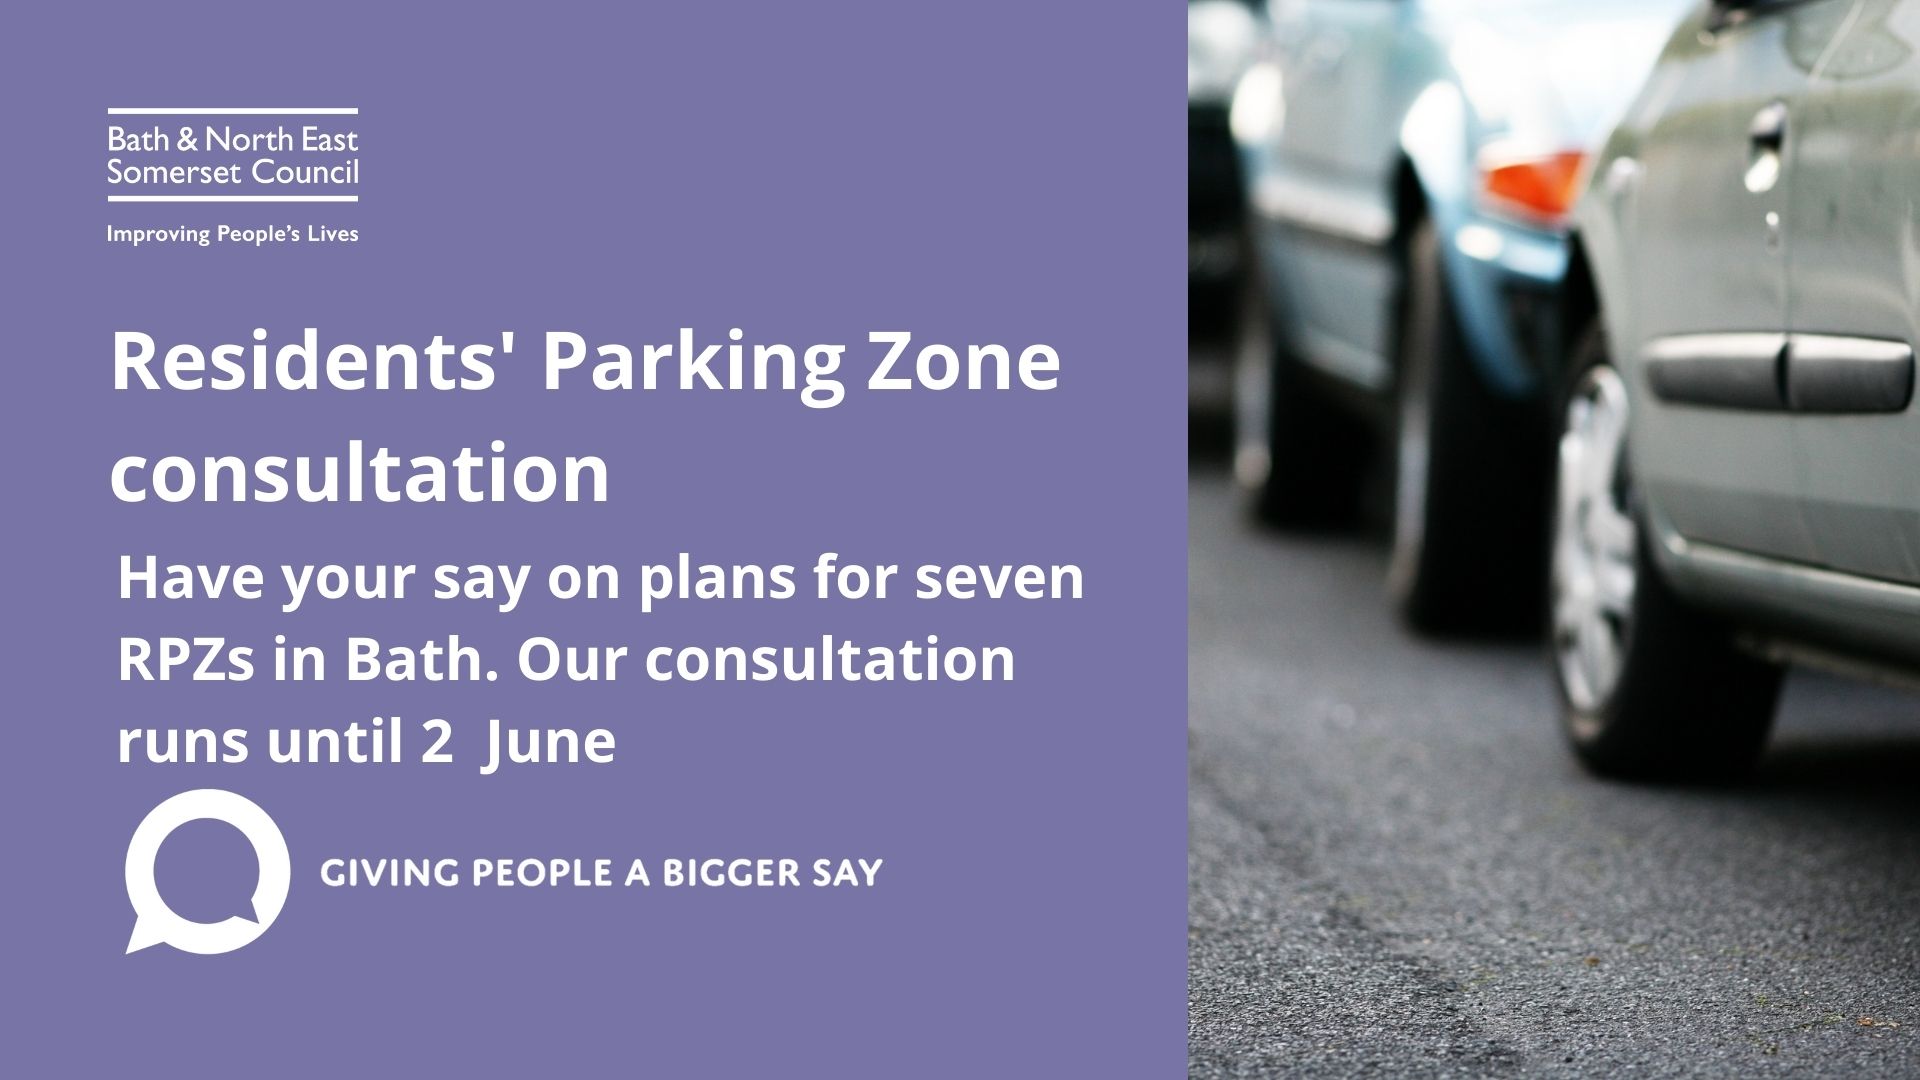 Consultation reminder for Residents’ Parking Zones